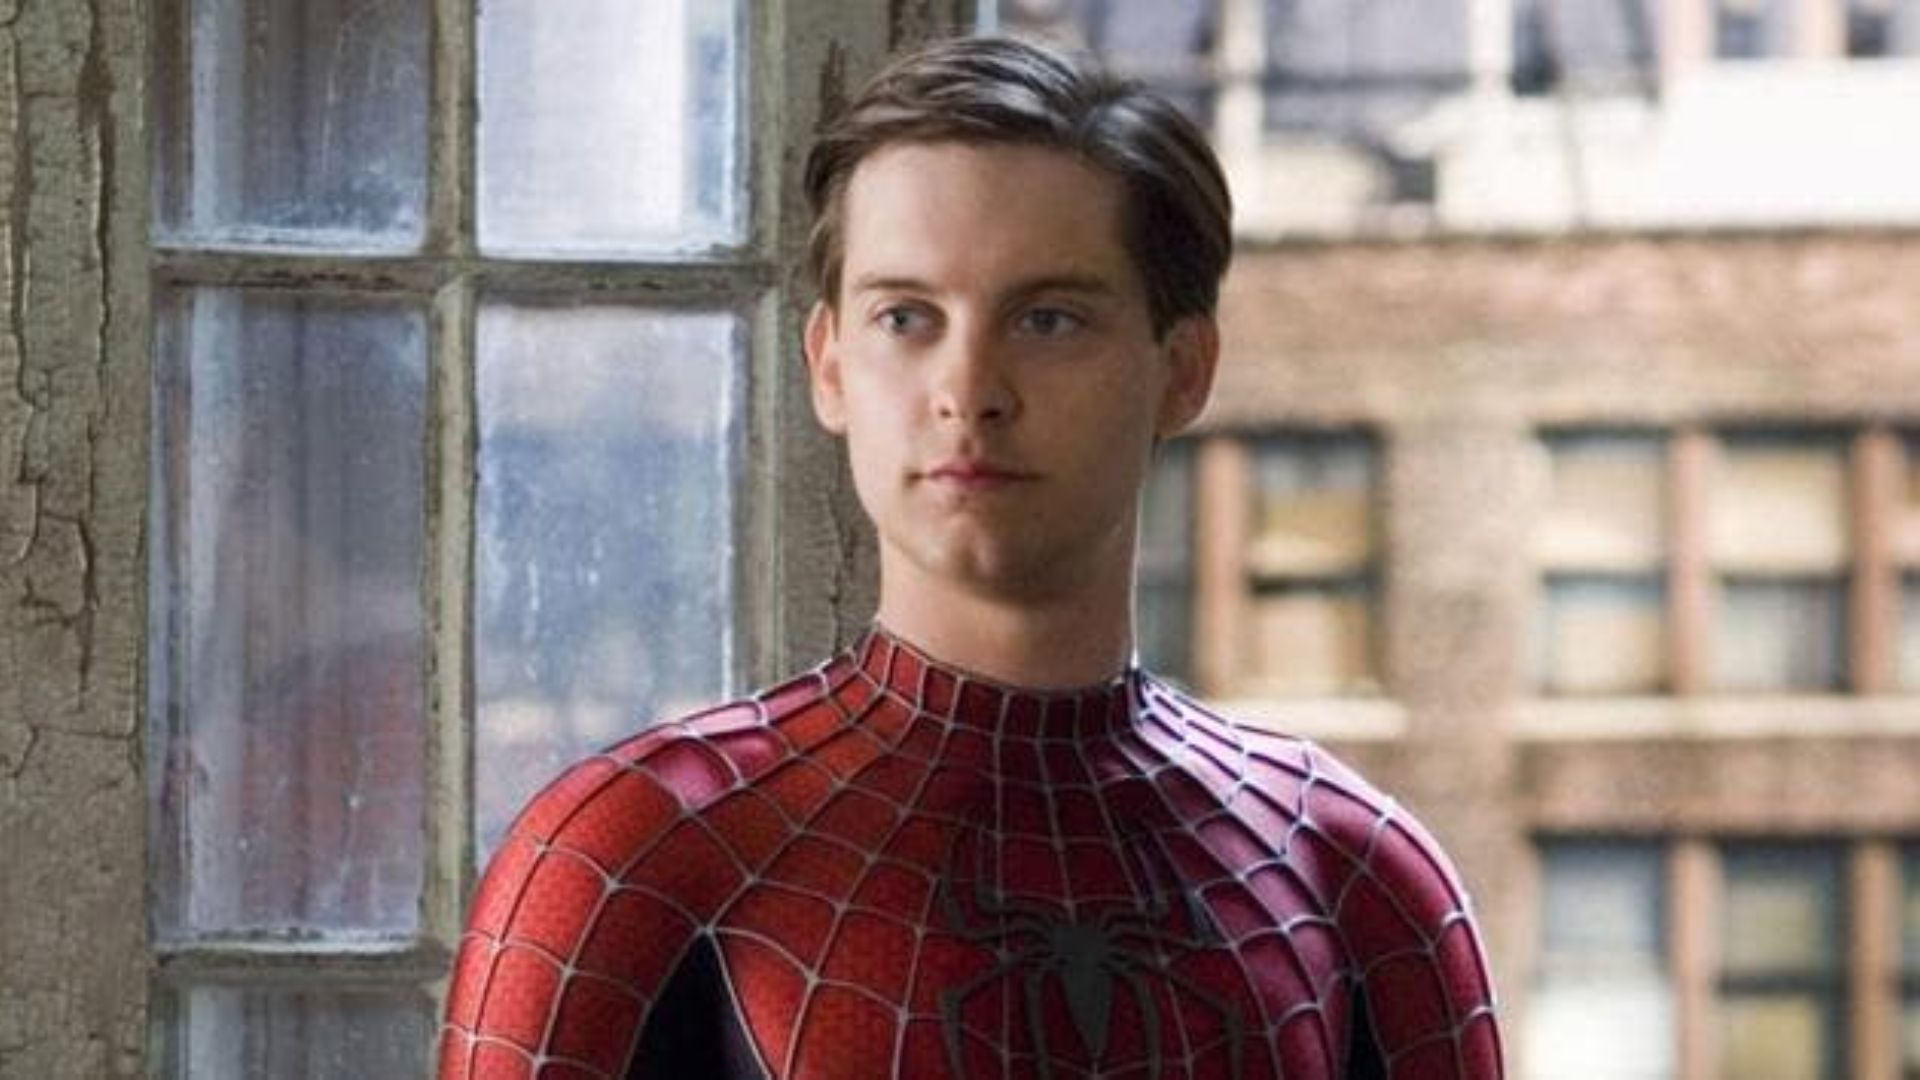 Tobey Maguire In Spiderman Suit